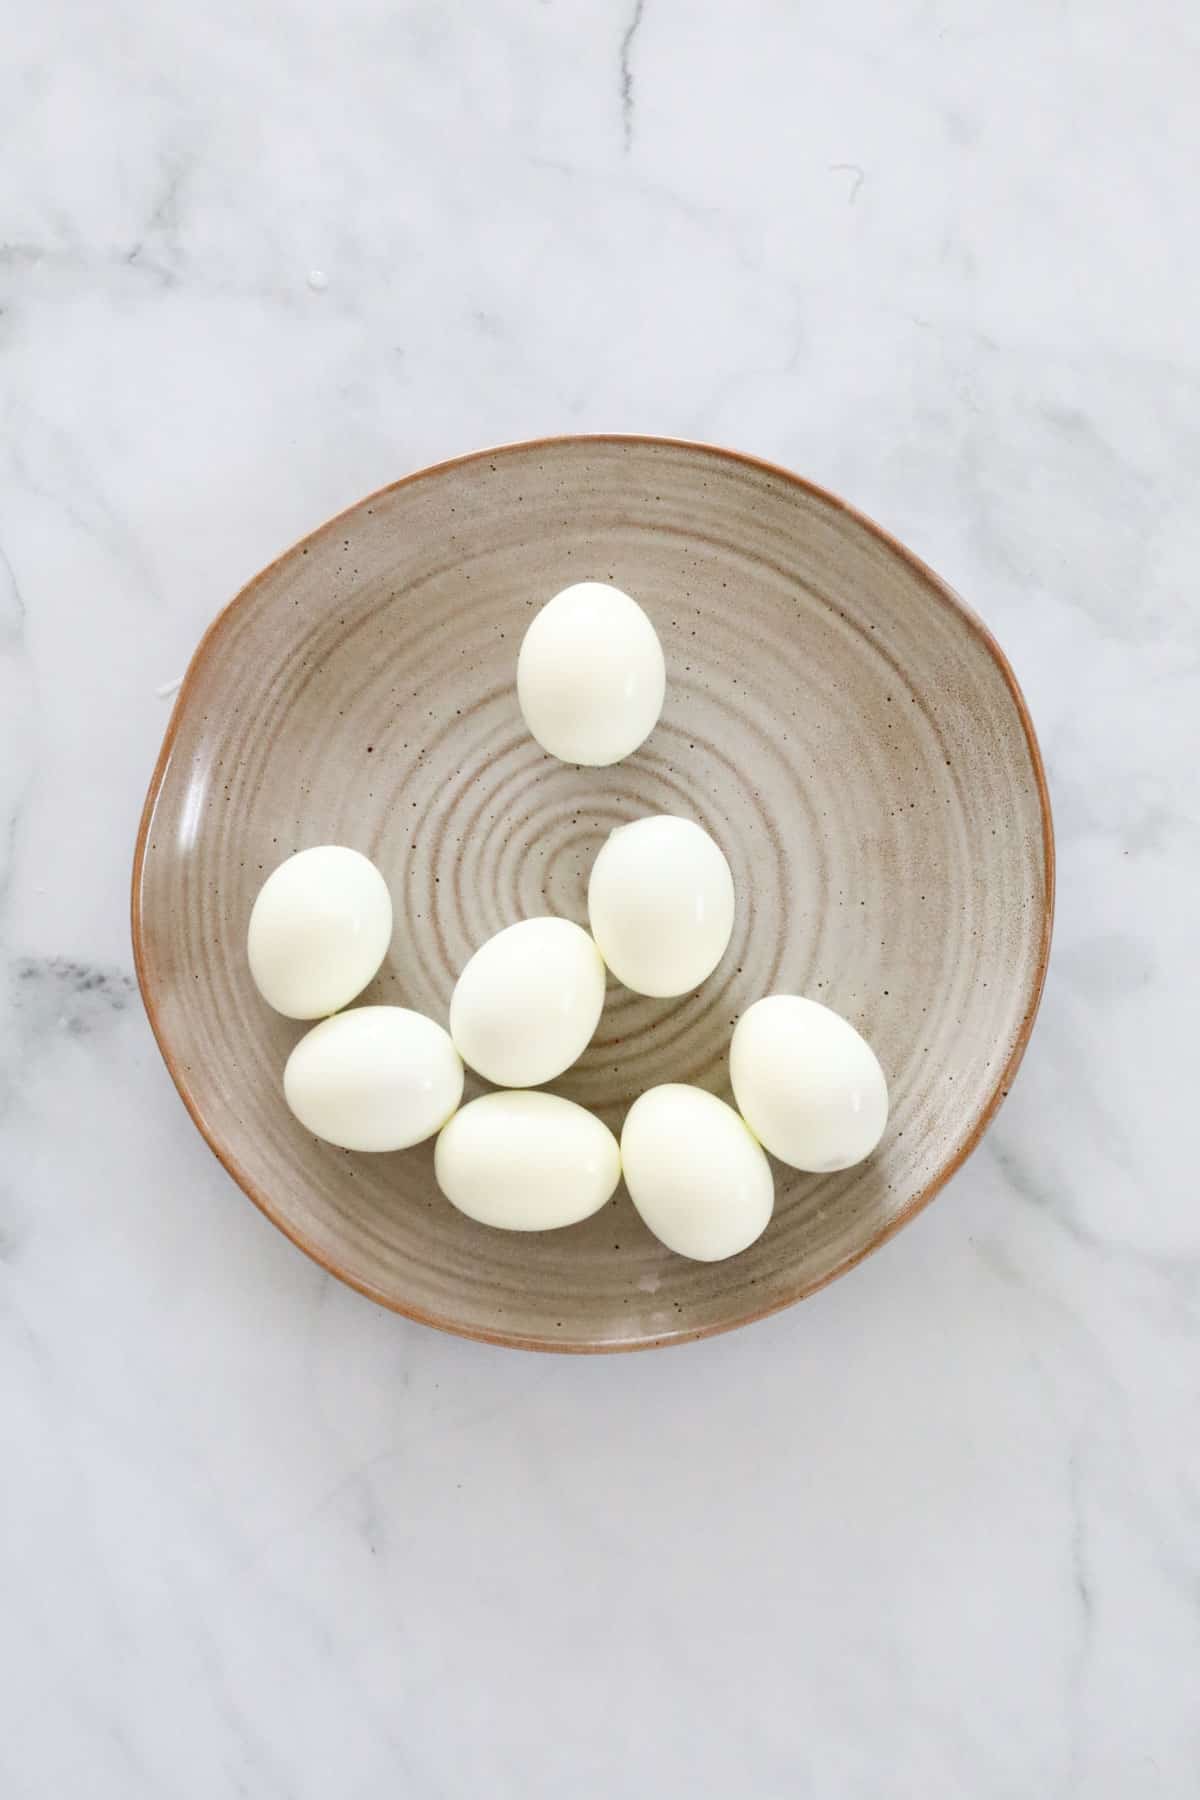 Peeled hard boiled eggs in a bowl.